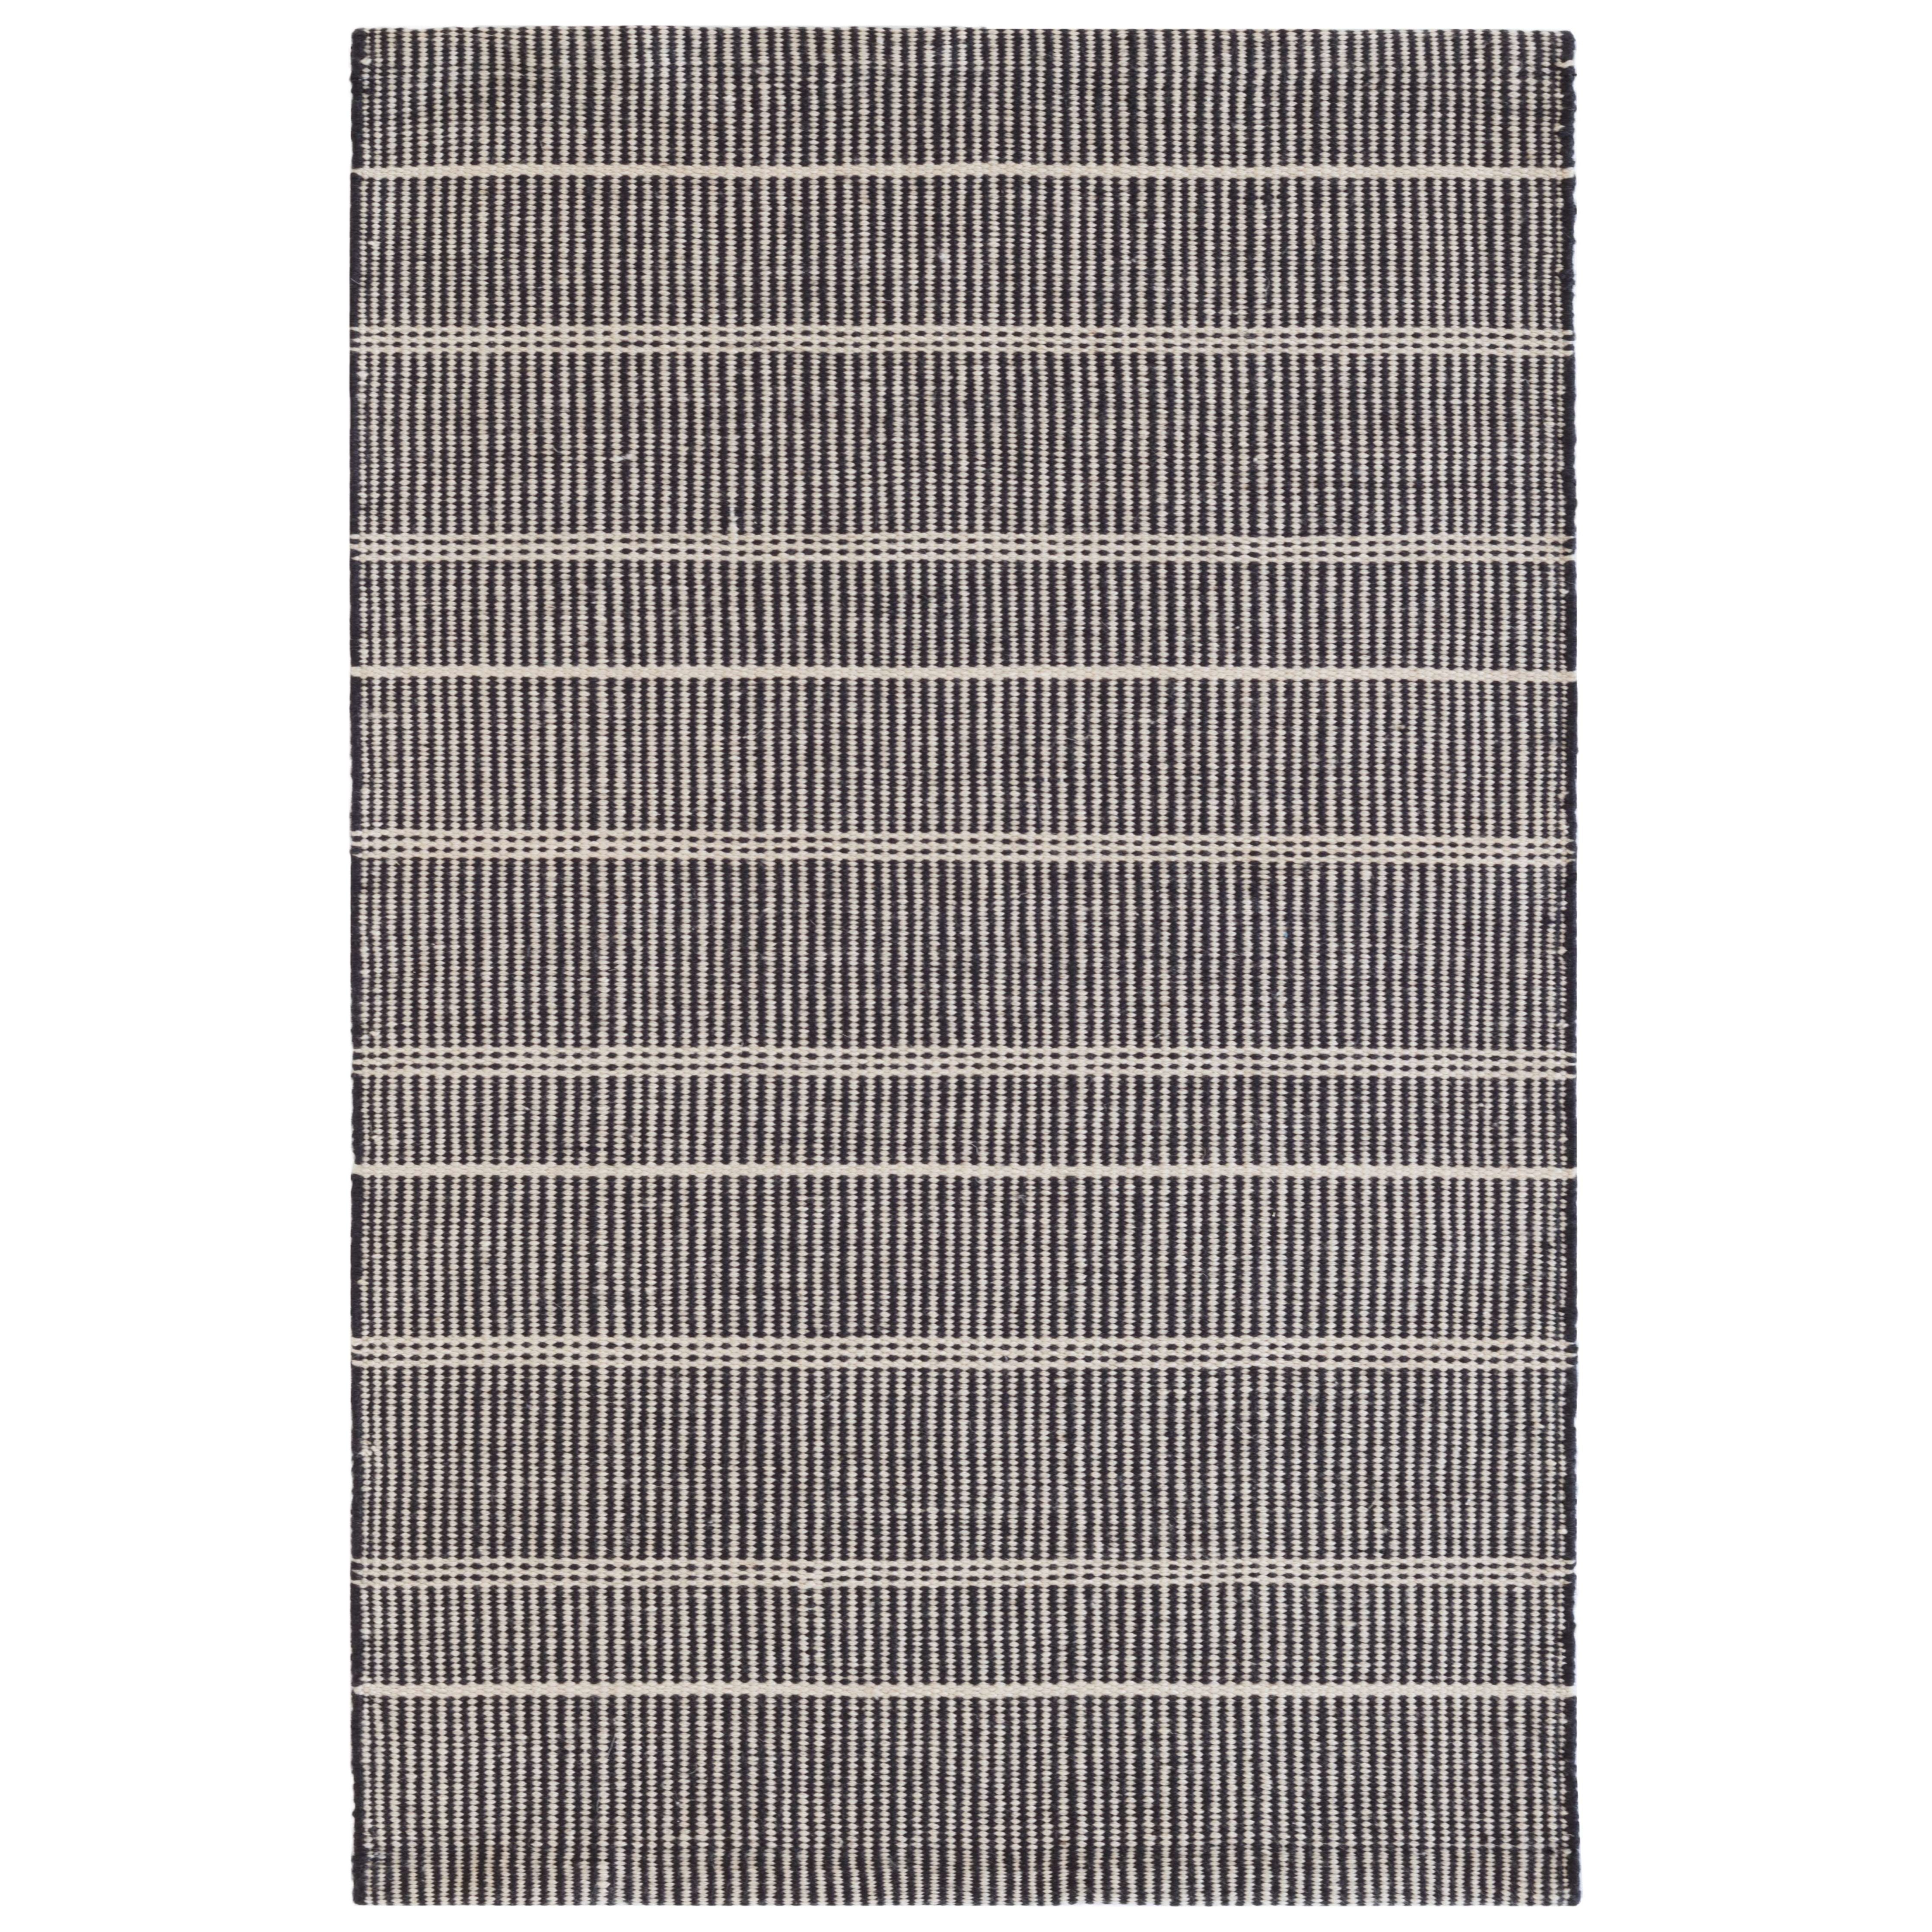 Part of our Bunny Williams collection, this delicately striped, black indoor/outdoor rug was inspired by an antique rug sample from the designer's own personal collection. Handcrafted from 100% PET, a washable polyester fiber made from recycled plastic bottles. Amethyst Home provides interior design, new construction, custom furniture, and area rugs in the Dallas metro area.